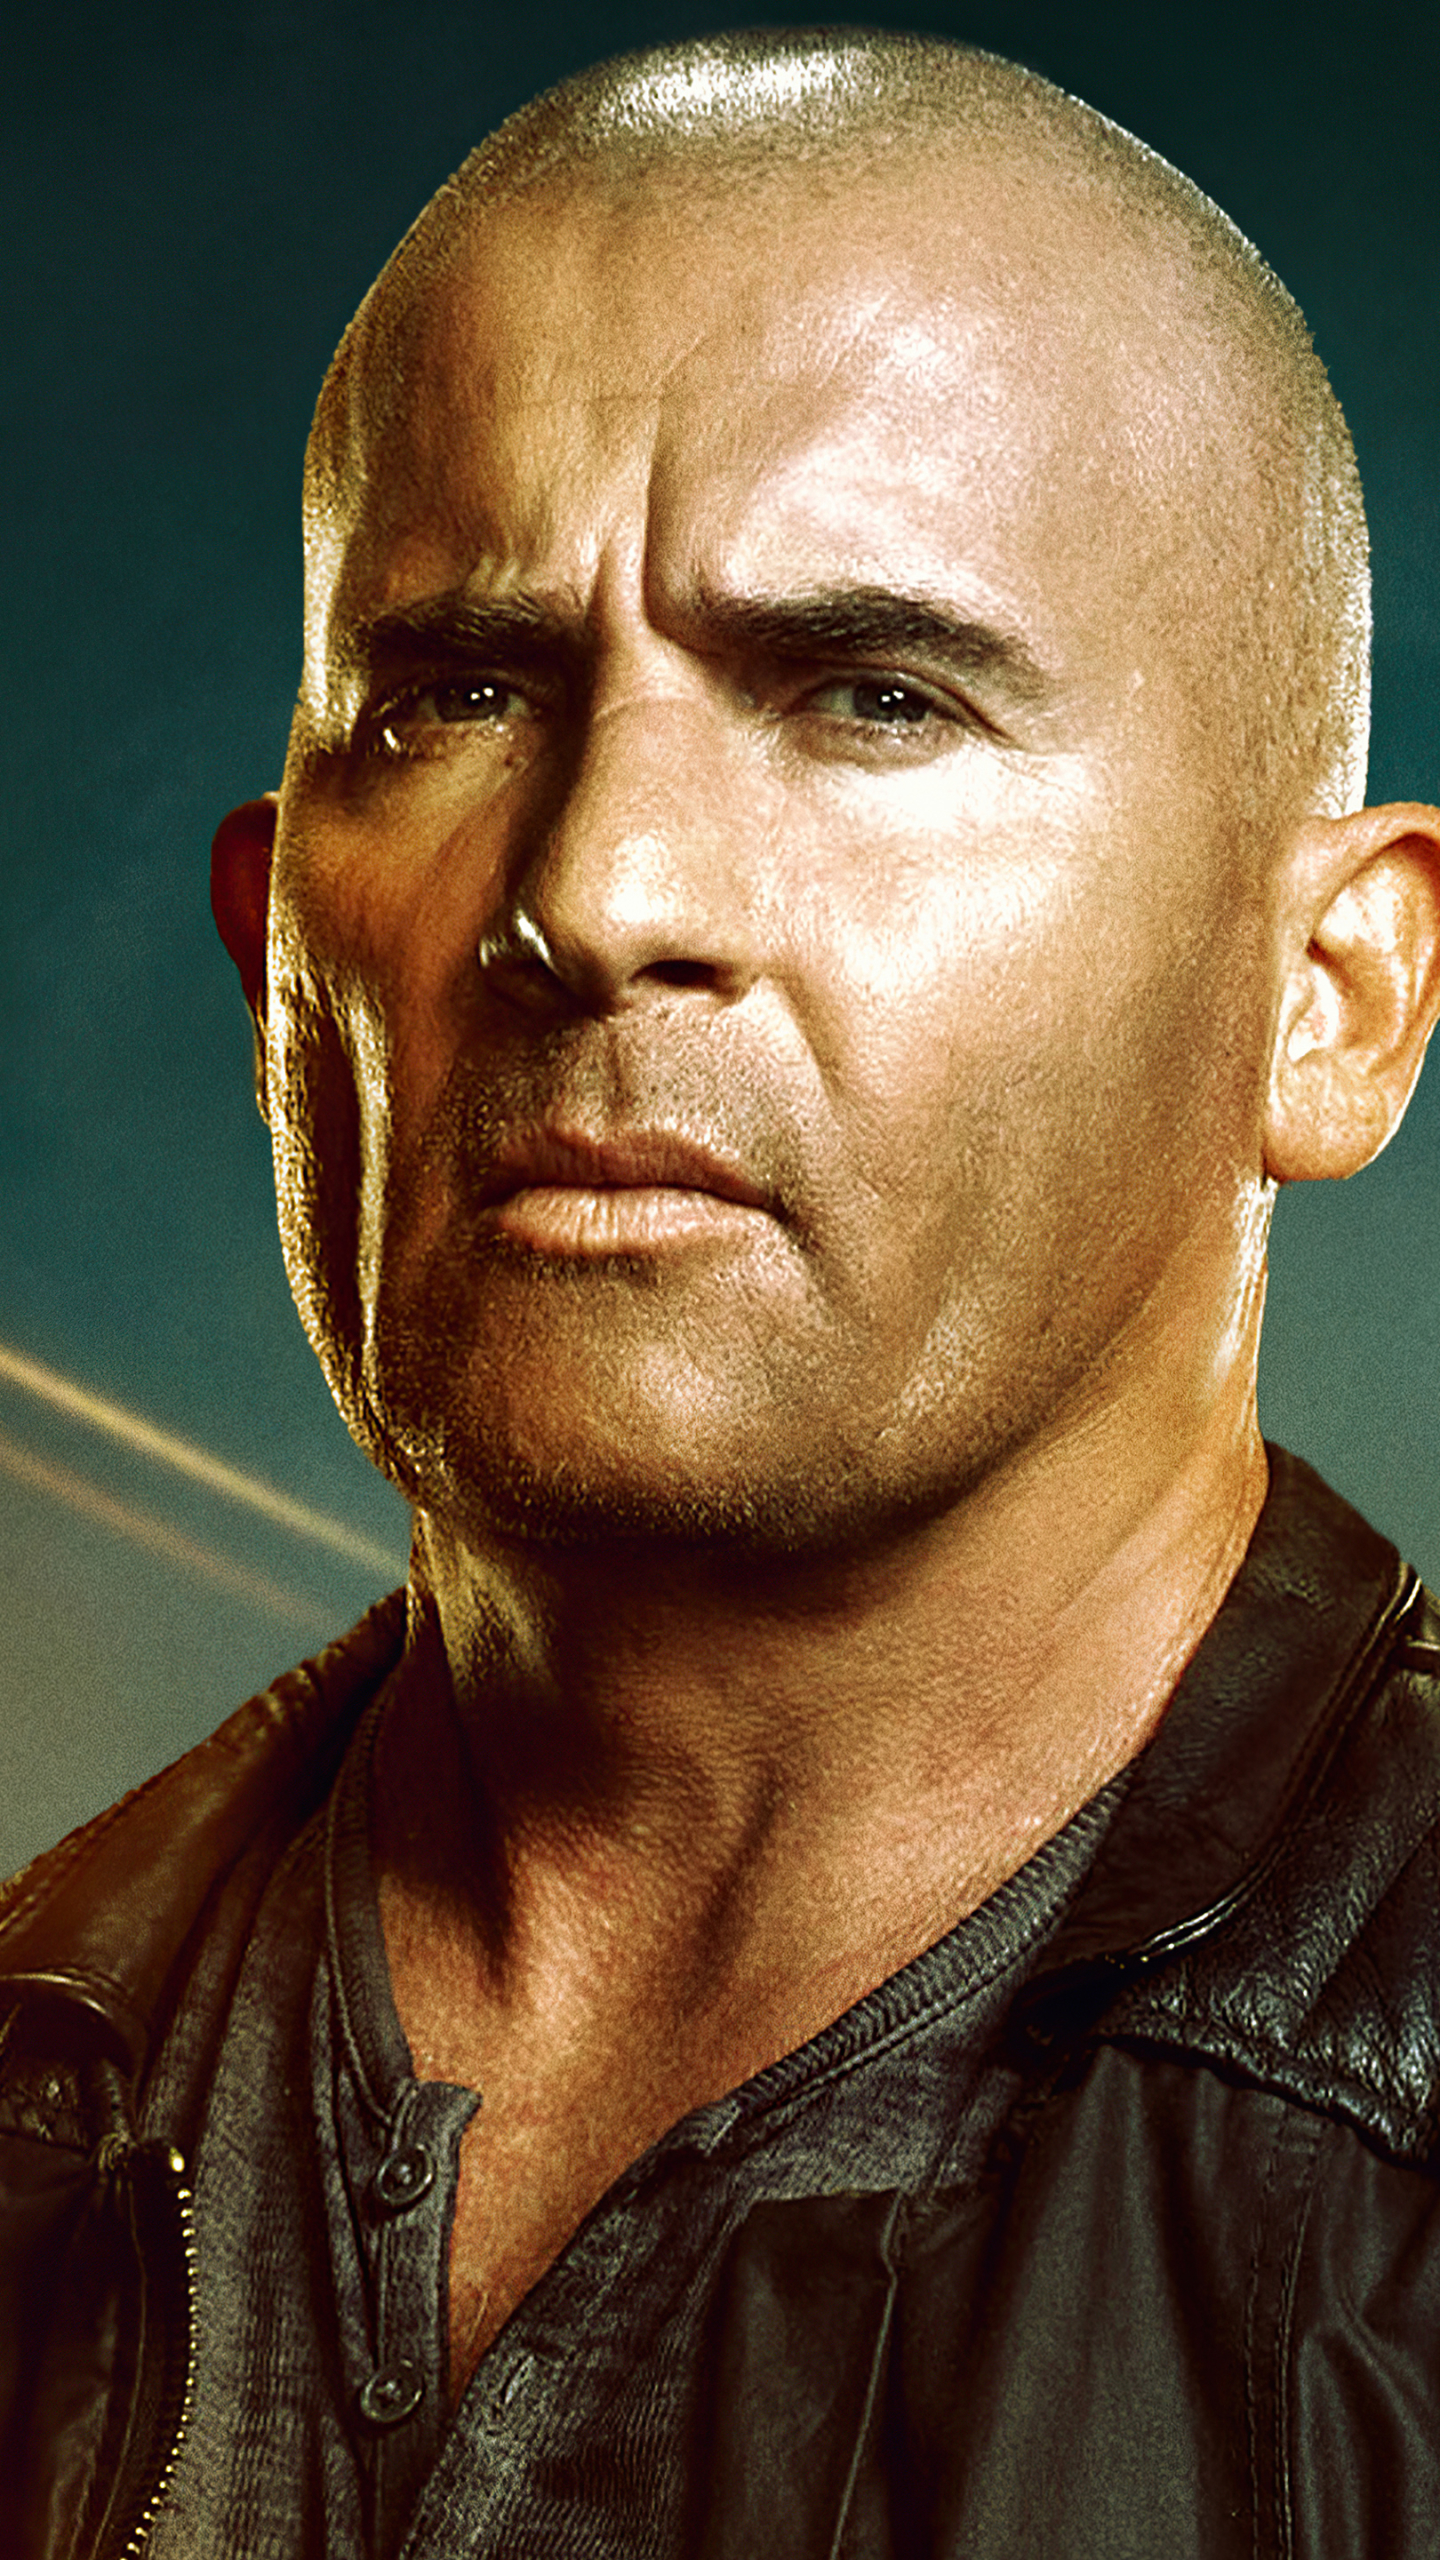 tv show, dc's legends of tomorrow, dominic purcell, heat wave (dc comics)